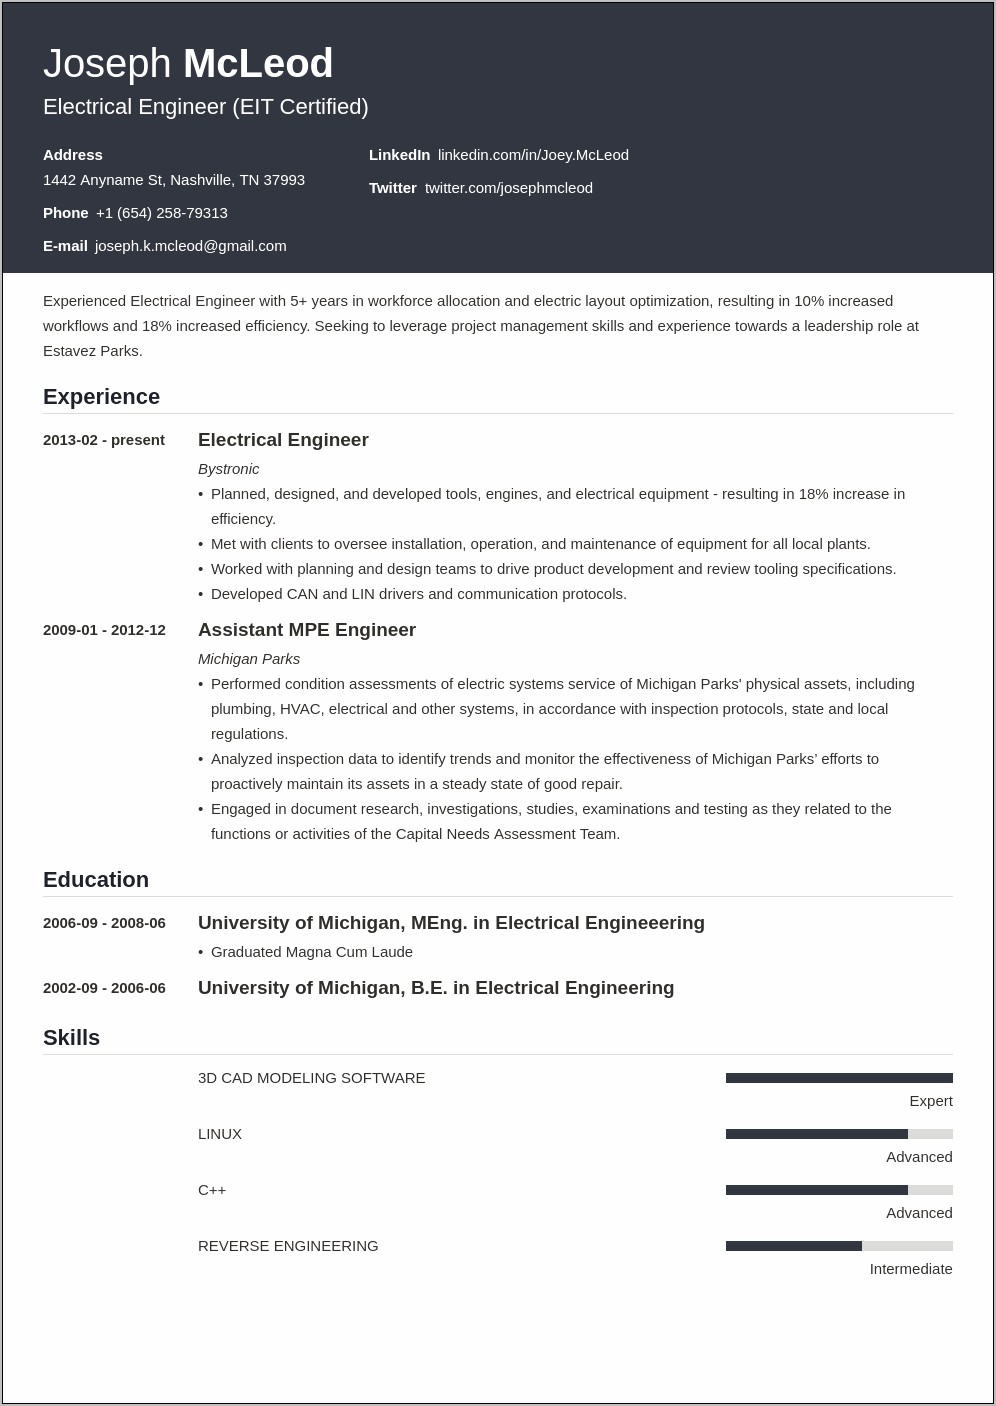 resume format in word for electrical engineer